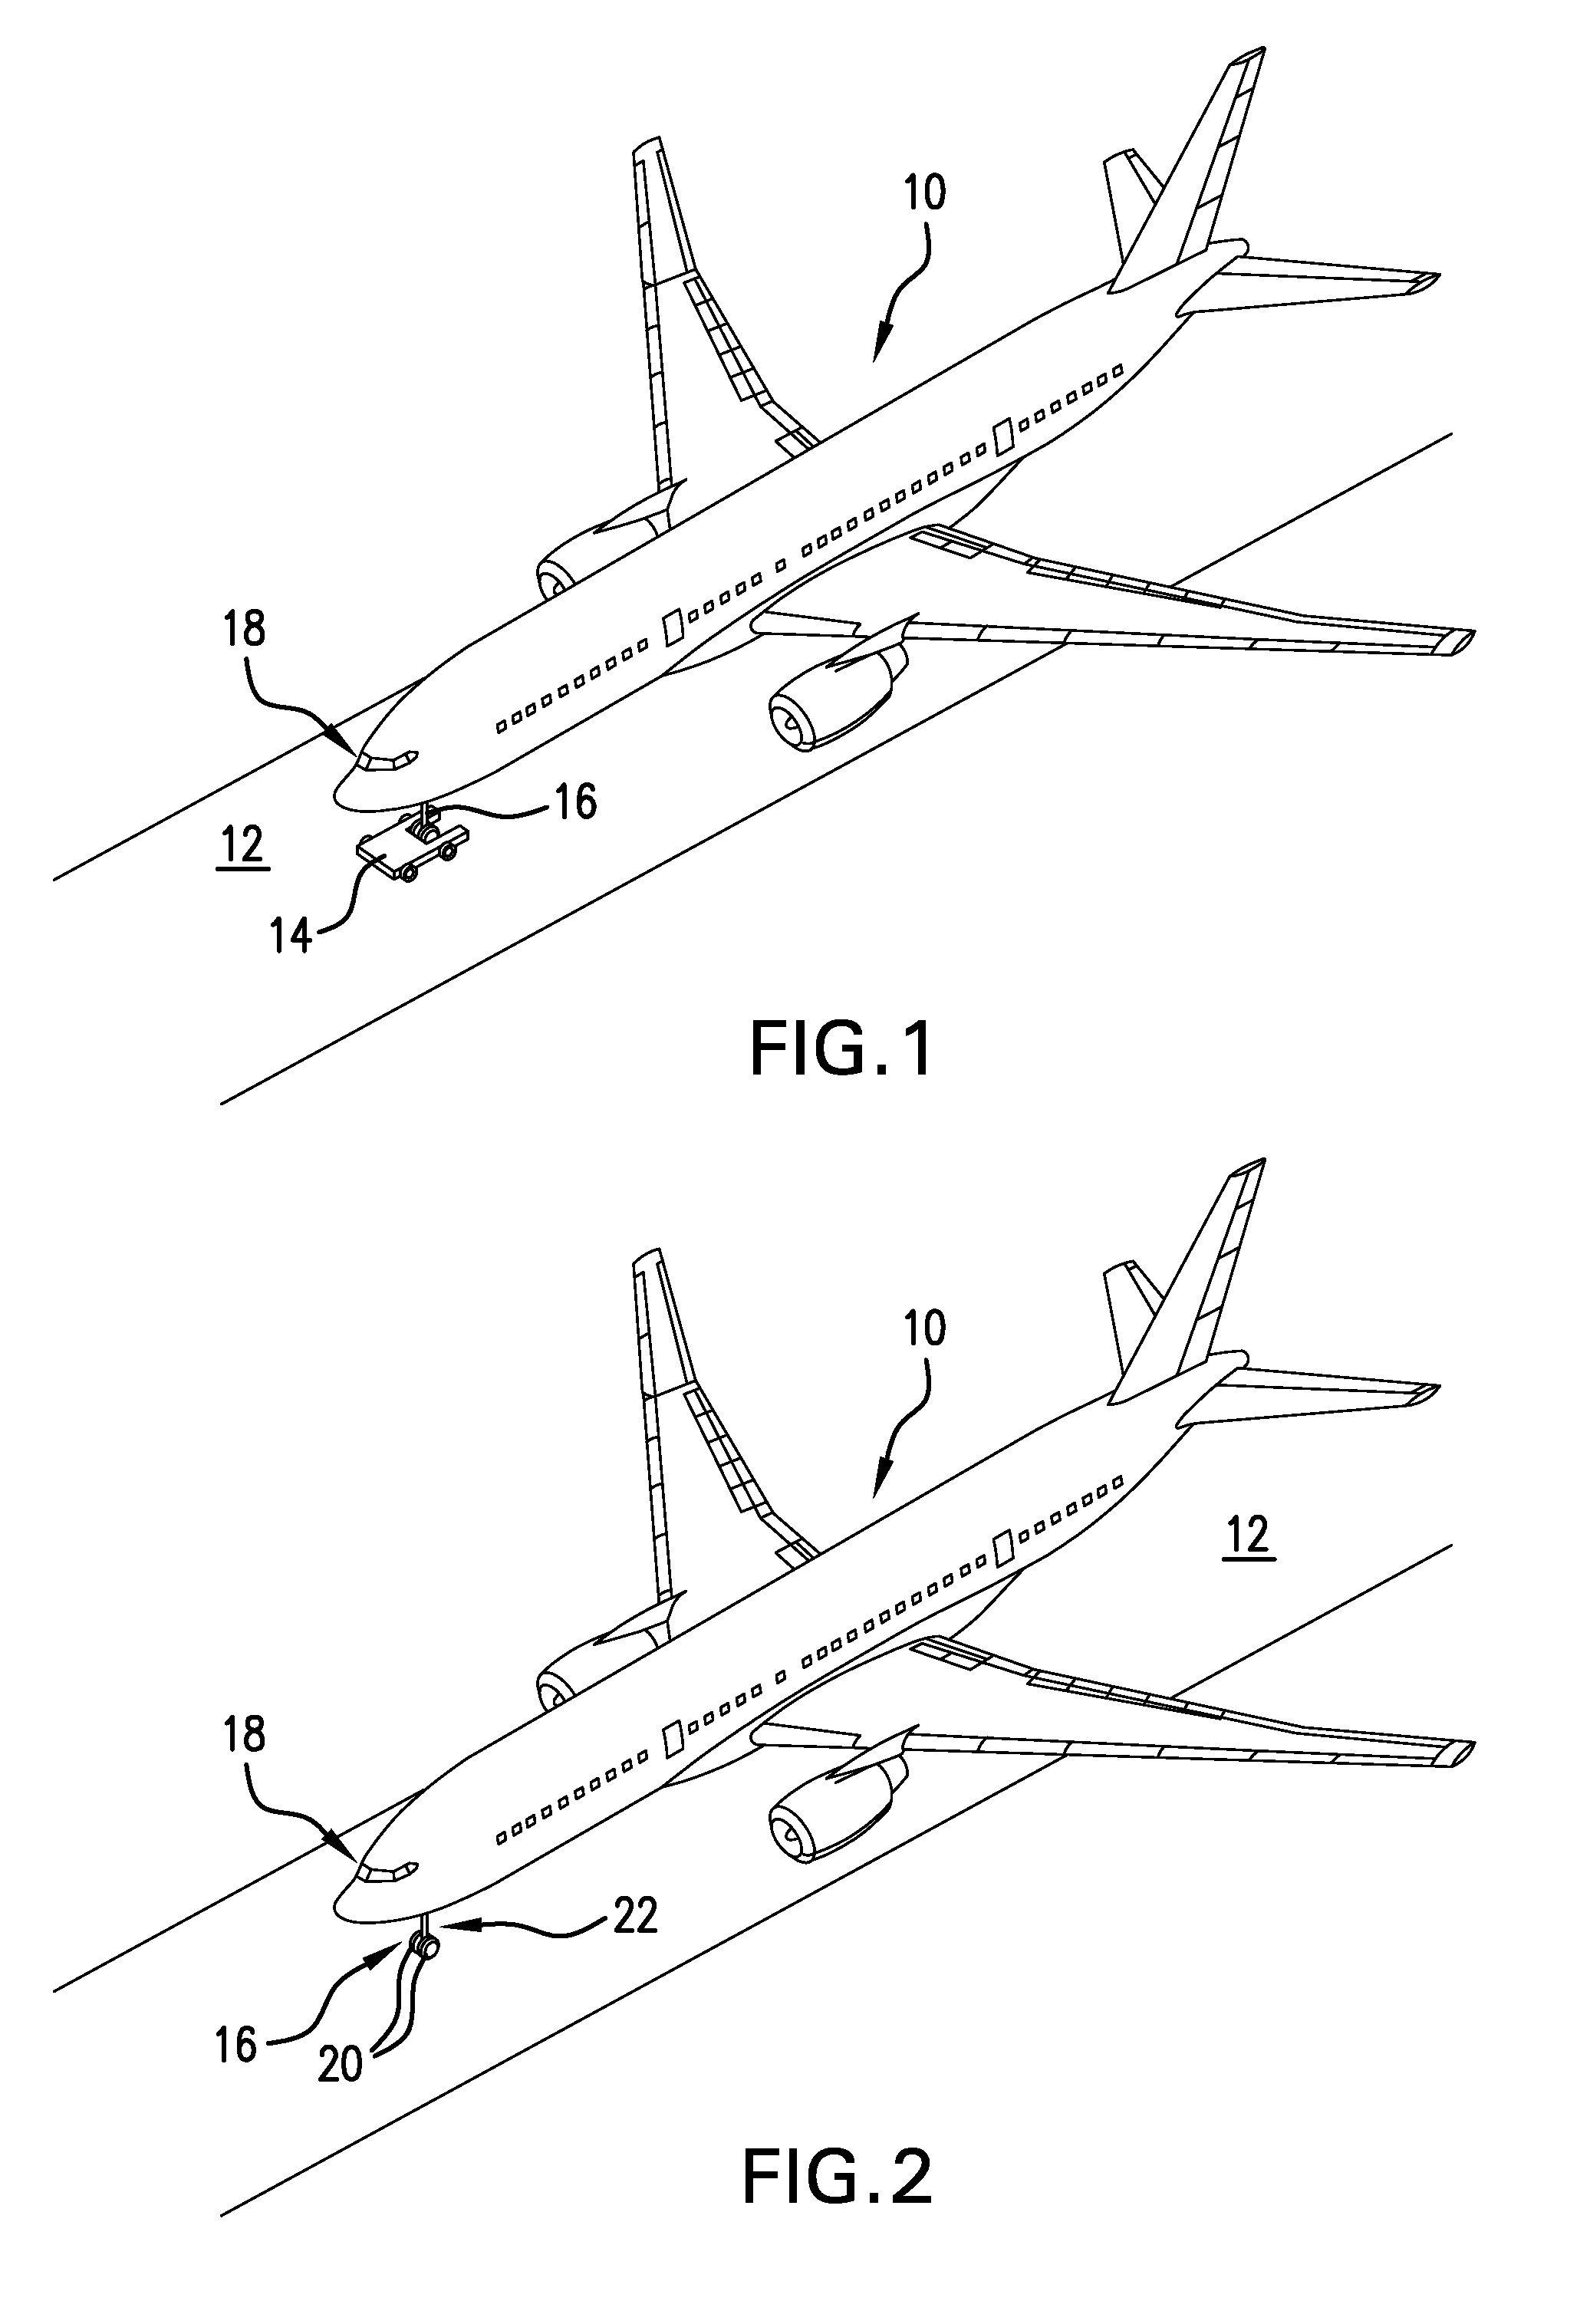 Method for increasing landing gear effective life and aircraft landing cycles